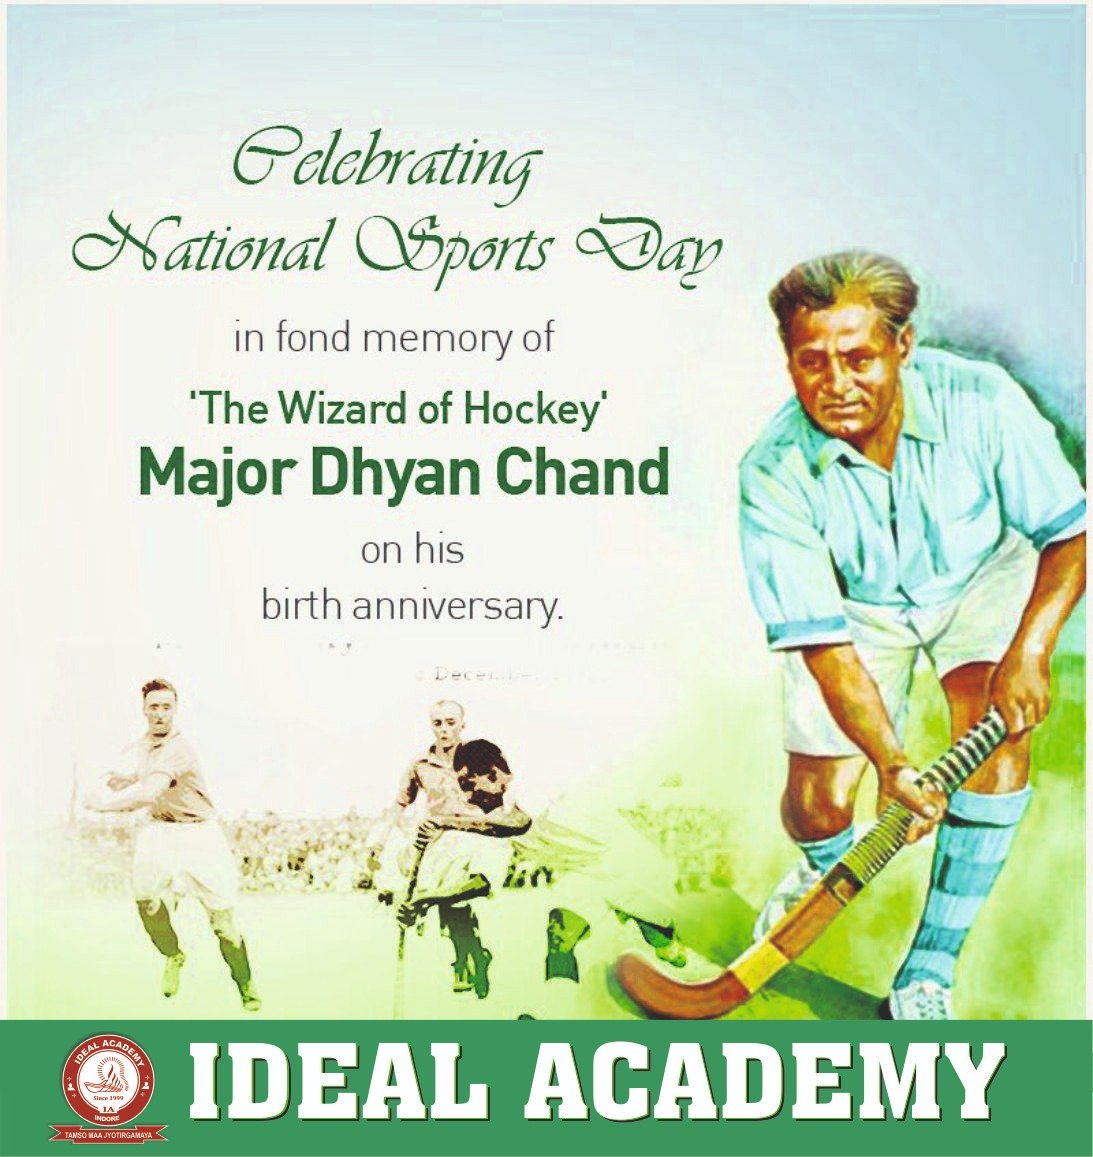 National Sports Day Ideal Academy